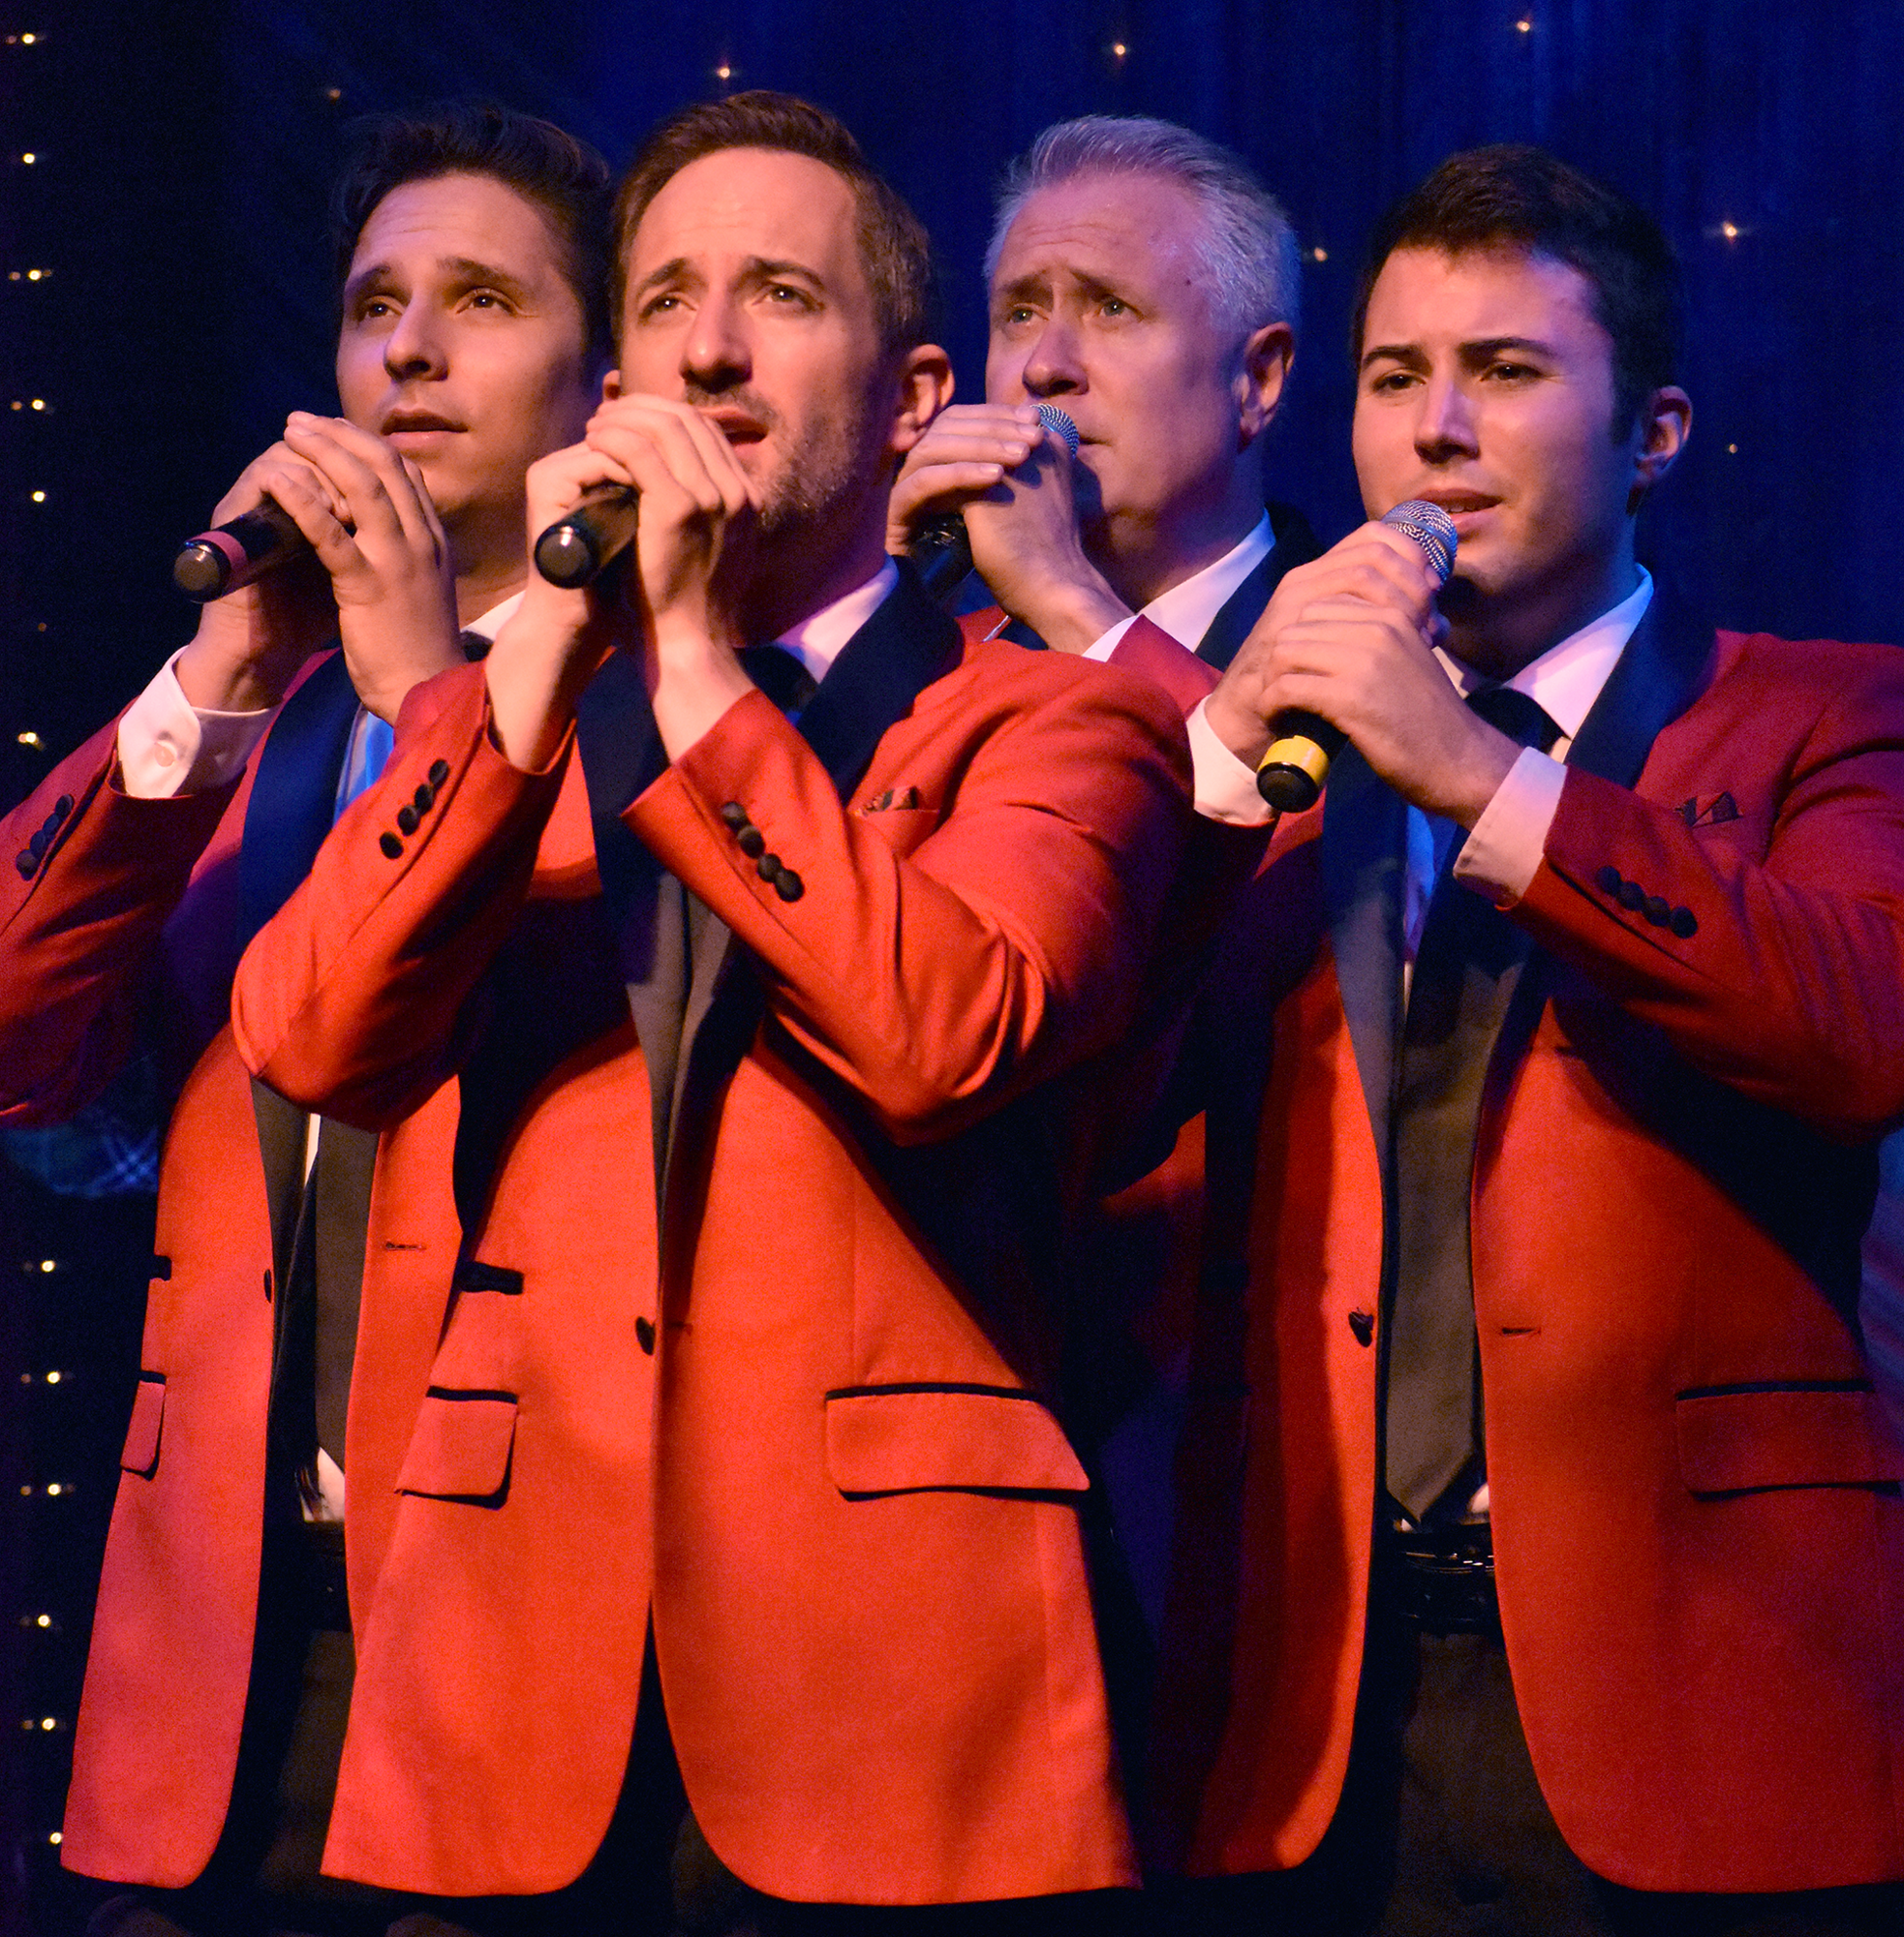 The Jersey Tenors Part II, pictured, are Michael Pilato, Vaden Thurgood, Brian Noonan, and Brandon Lambert. (Courtesy photo by Florida Studio Theatre.)